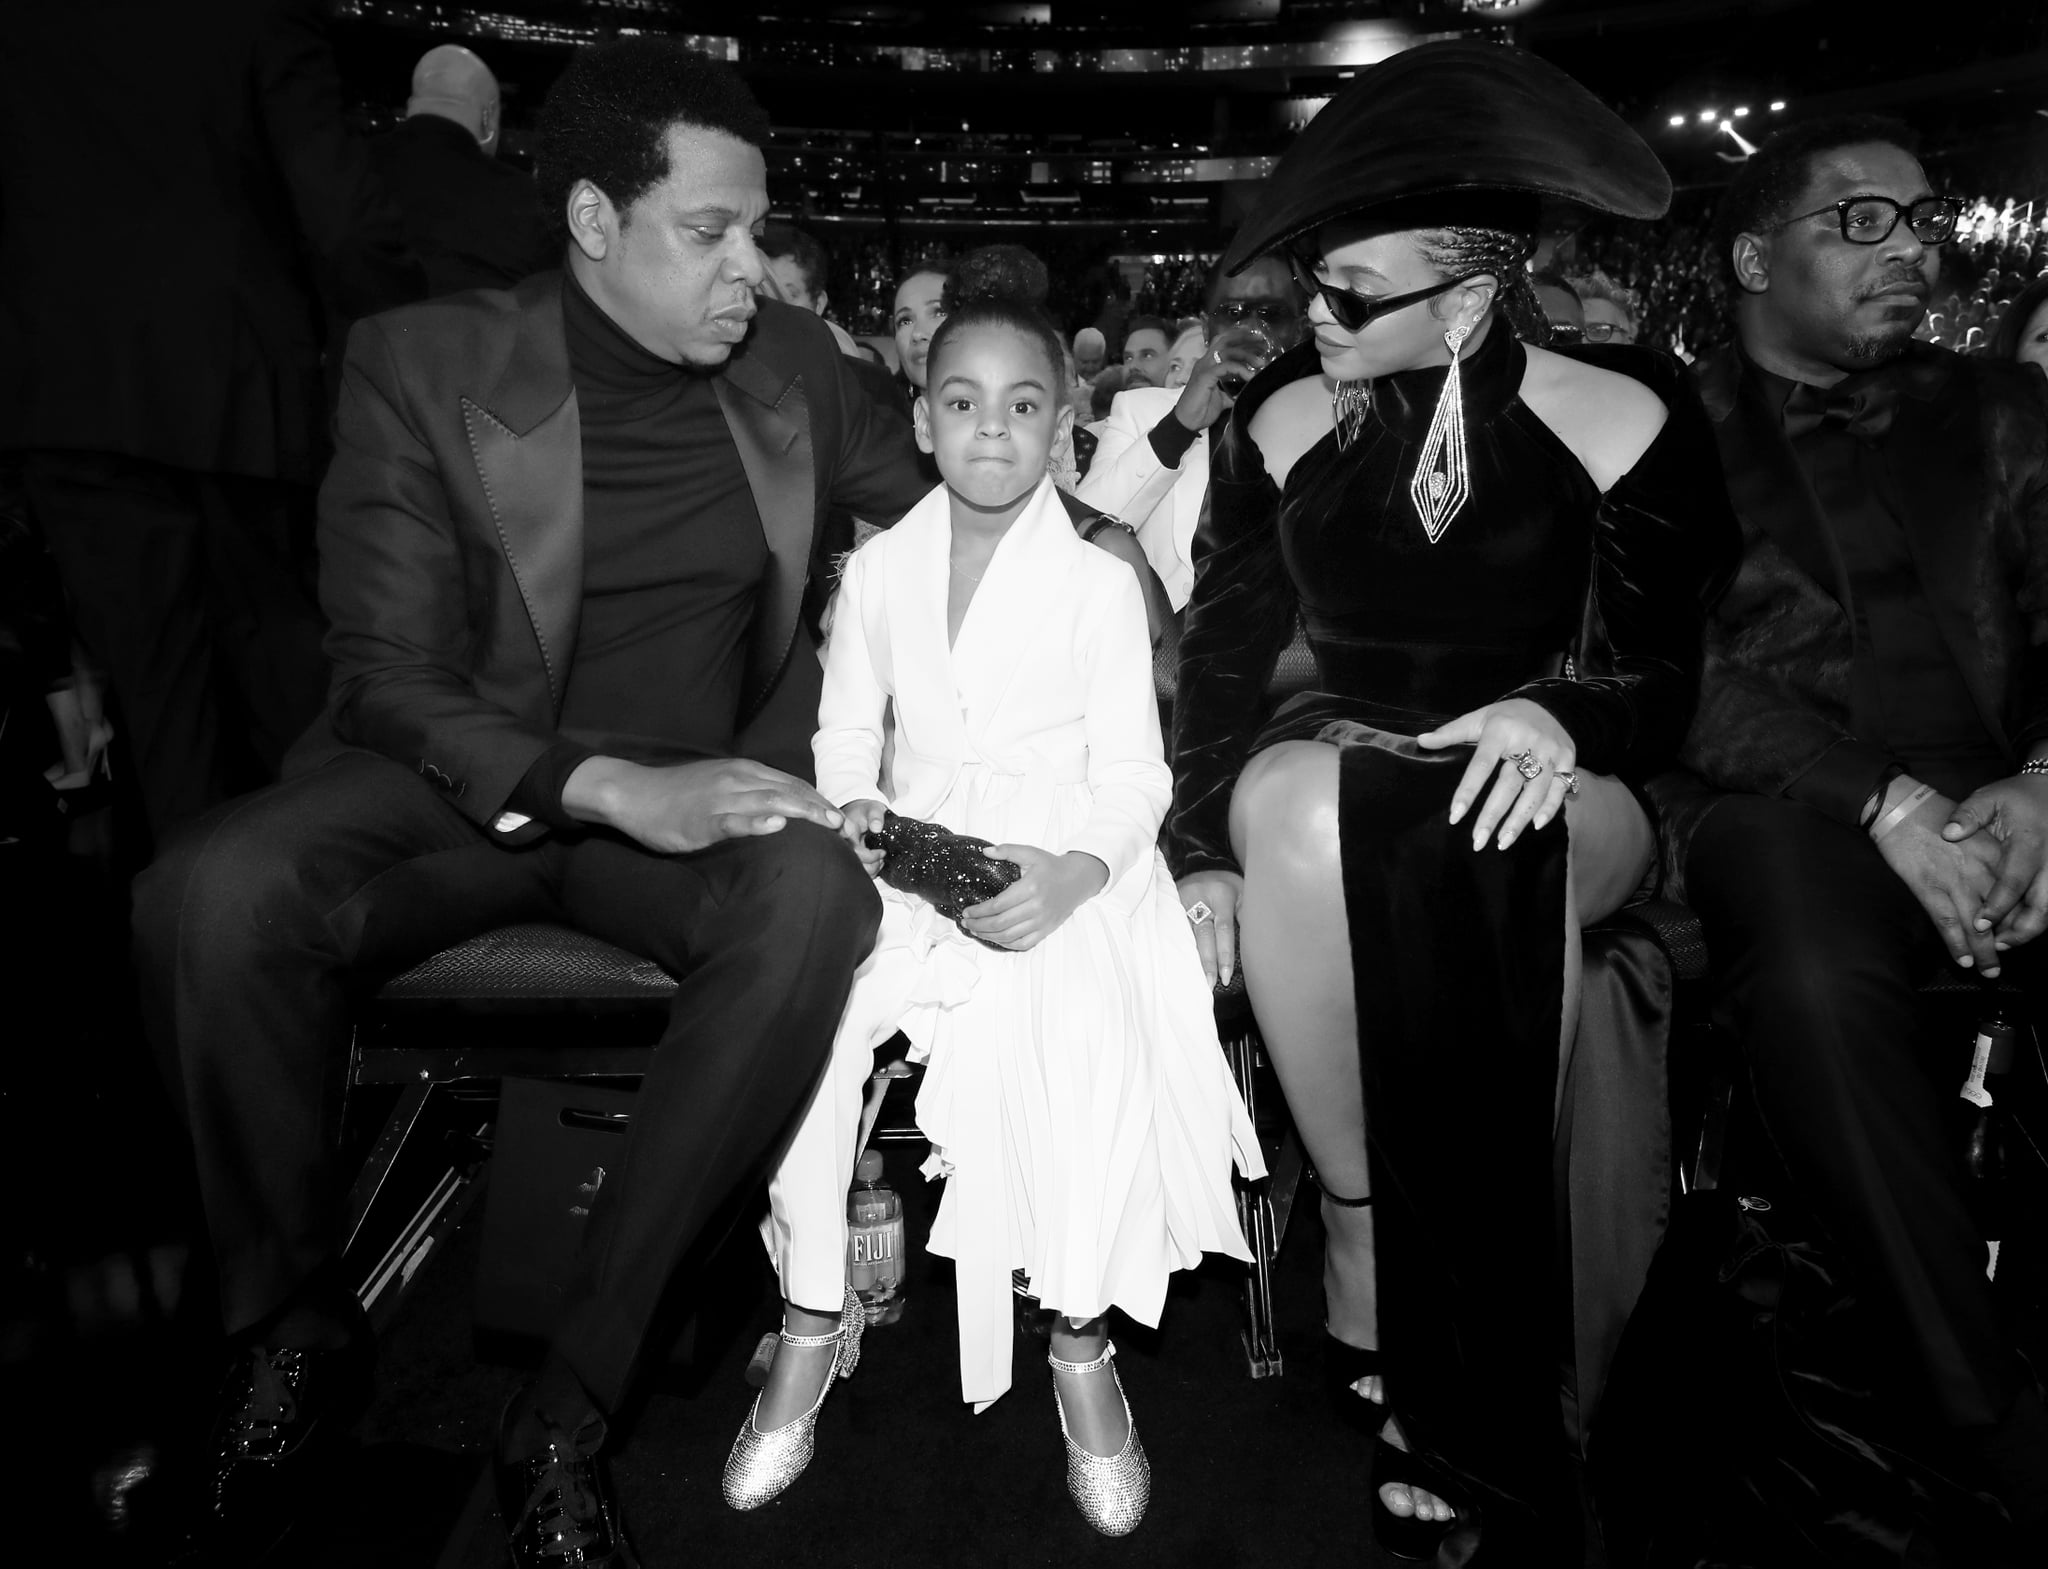 NEW YORK, NY - JANUARY 28:  (EDITOR'S NOTE: Image has been converted to black and white.)  (L-R) Recording artist Jay-Z, Blue Ivy Carter and recording artist Beyonce attend the 60th Annual GRAMMY Awards at Madison Square Garden on January 28, 2018 in New York City.  (Photo by Christopher Polk/Getty Images for NARAS)